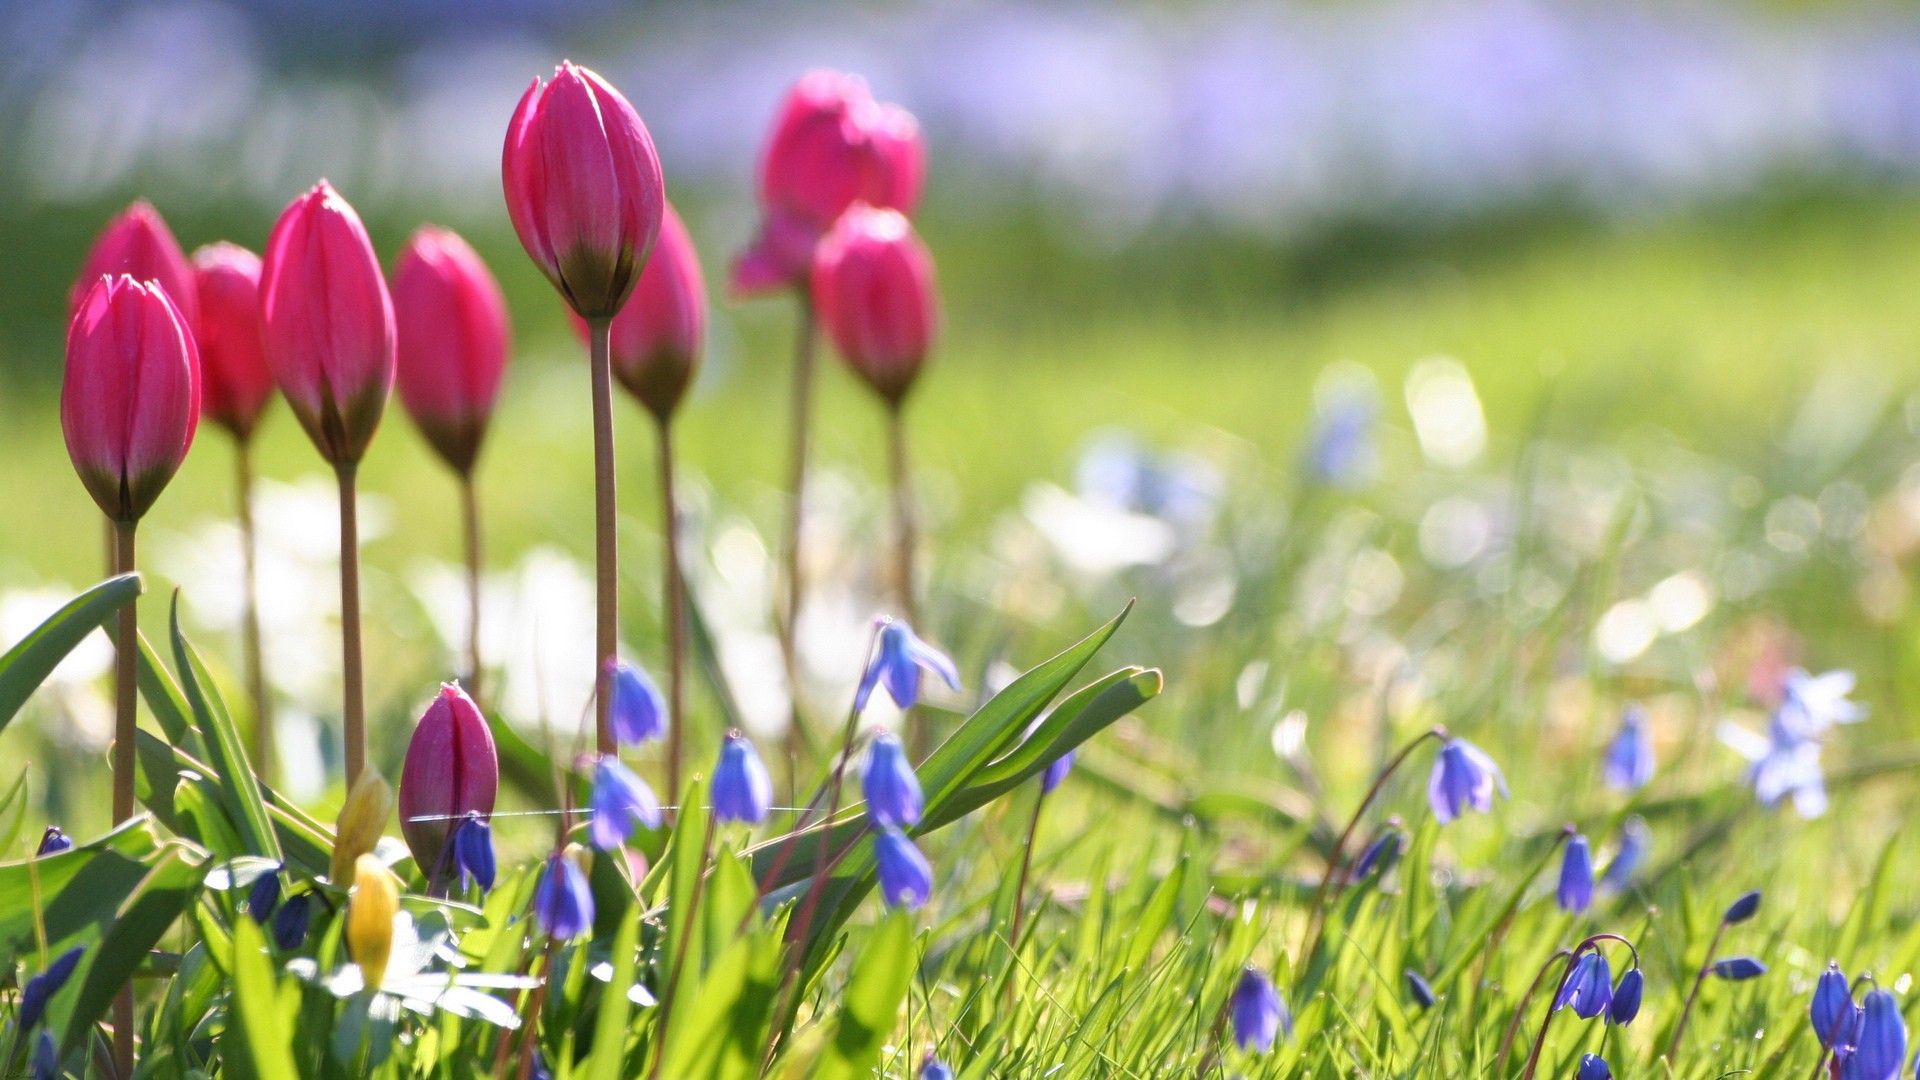 1920x1080 Spring Flowers Wallpapers & Pictures : Find best latest Spring Flowers  Wallpapers & Pictures in HD for your PC desktop background and mobile  phones.